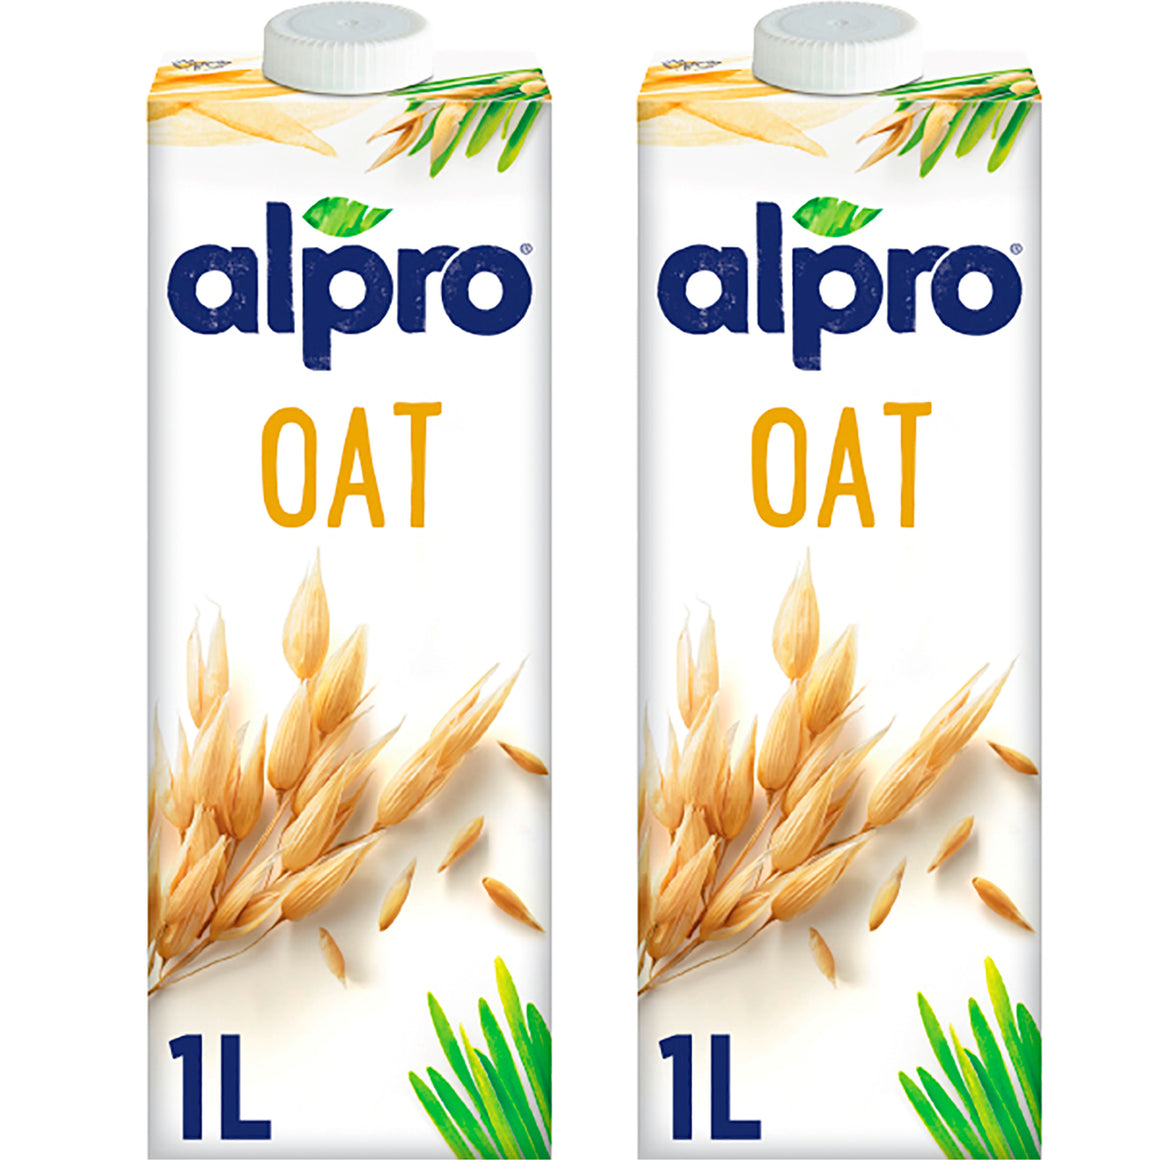 Alpro Drink Oat Dual Pack (1l x 2), 100% Plant Based And Dairy Free, Suitable For Vegans, Naturally Free From Lactose, Rich In Nutrients